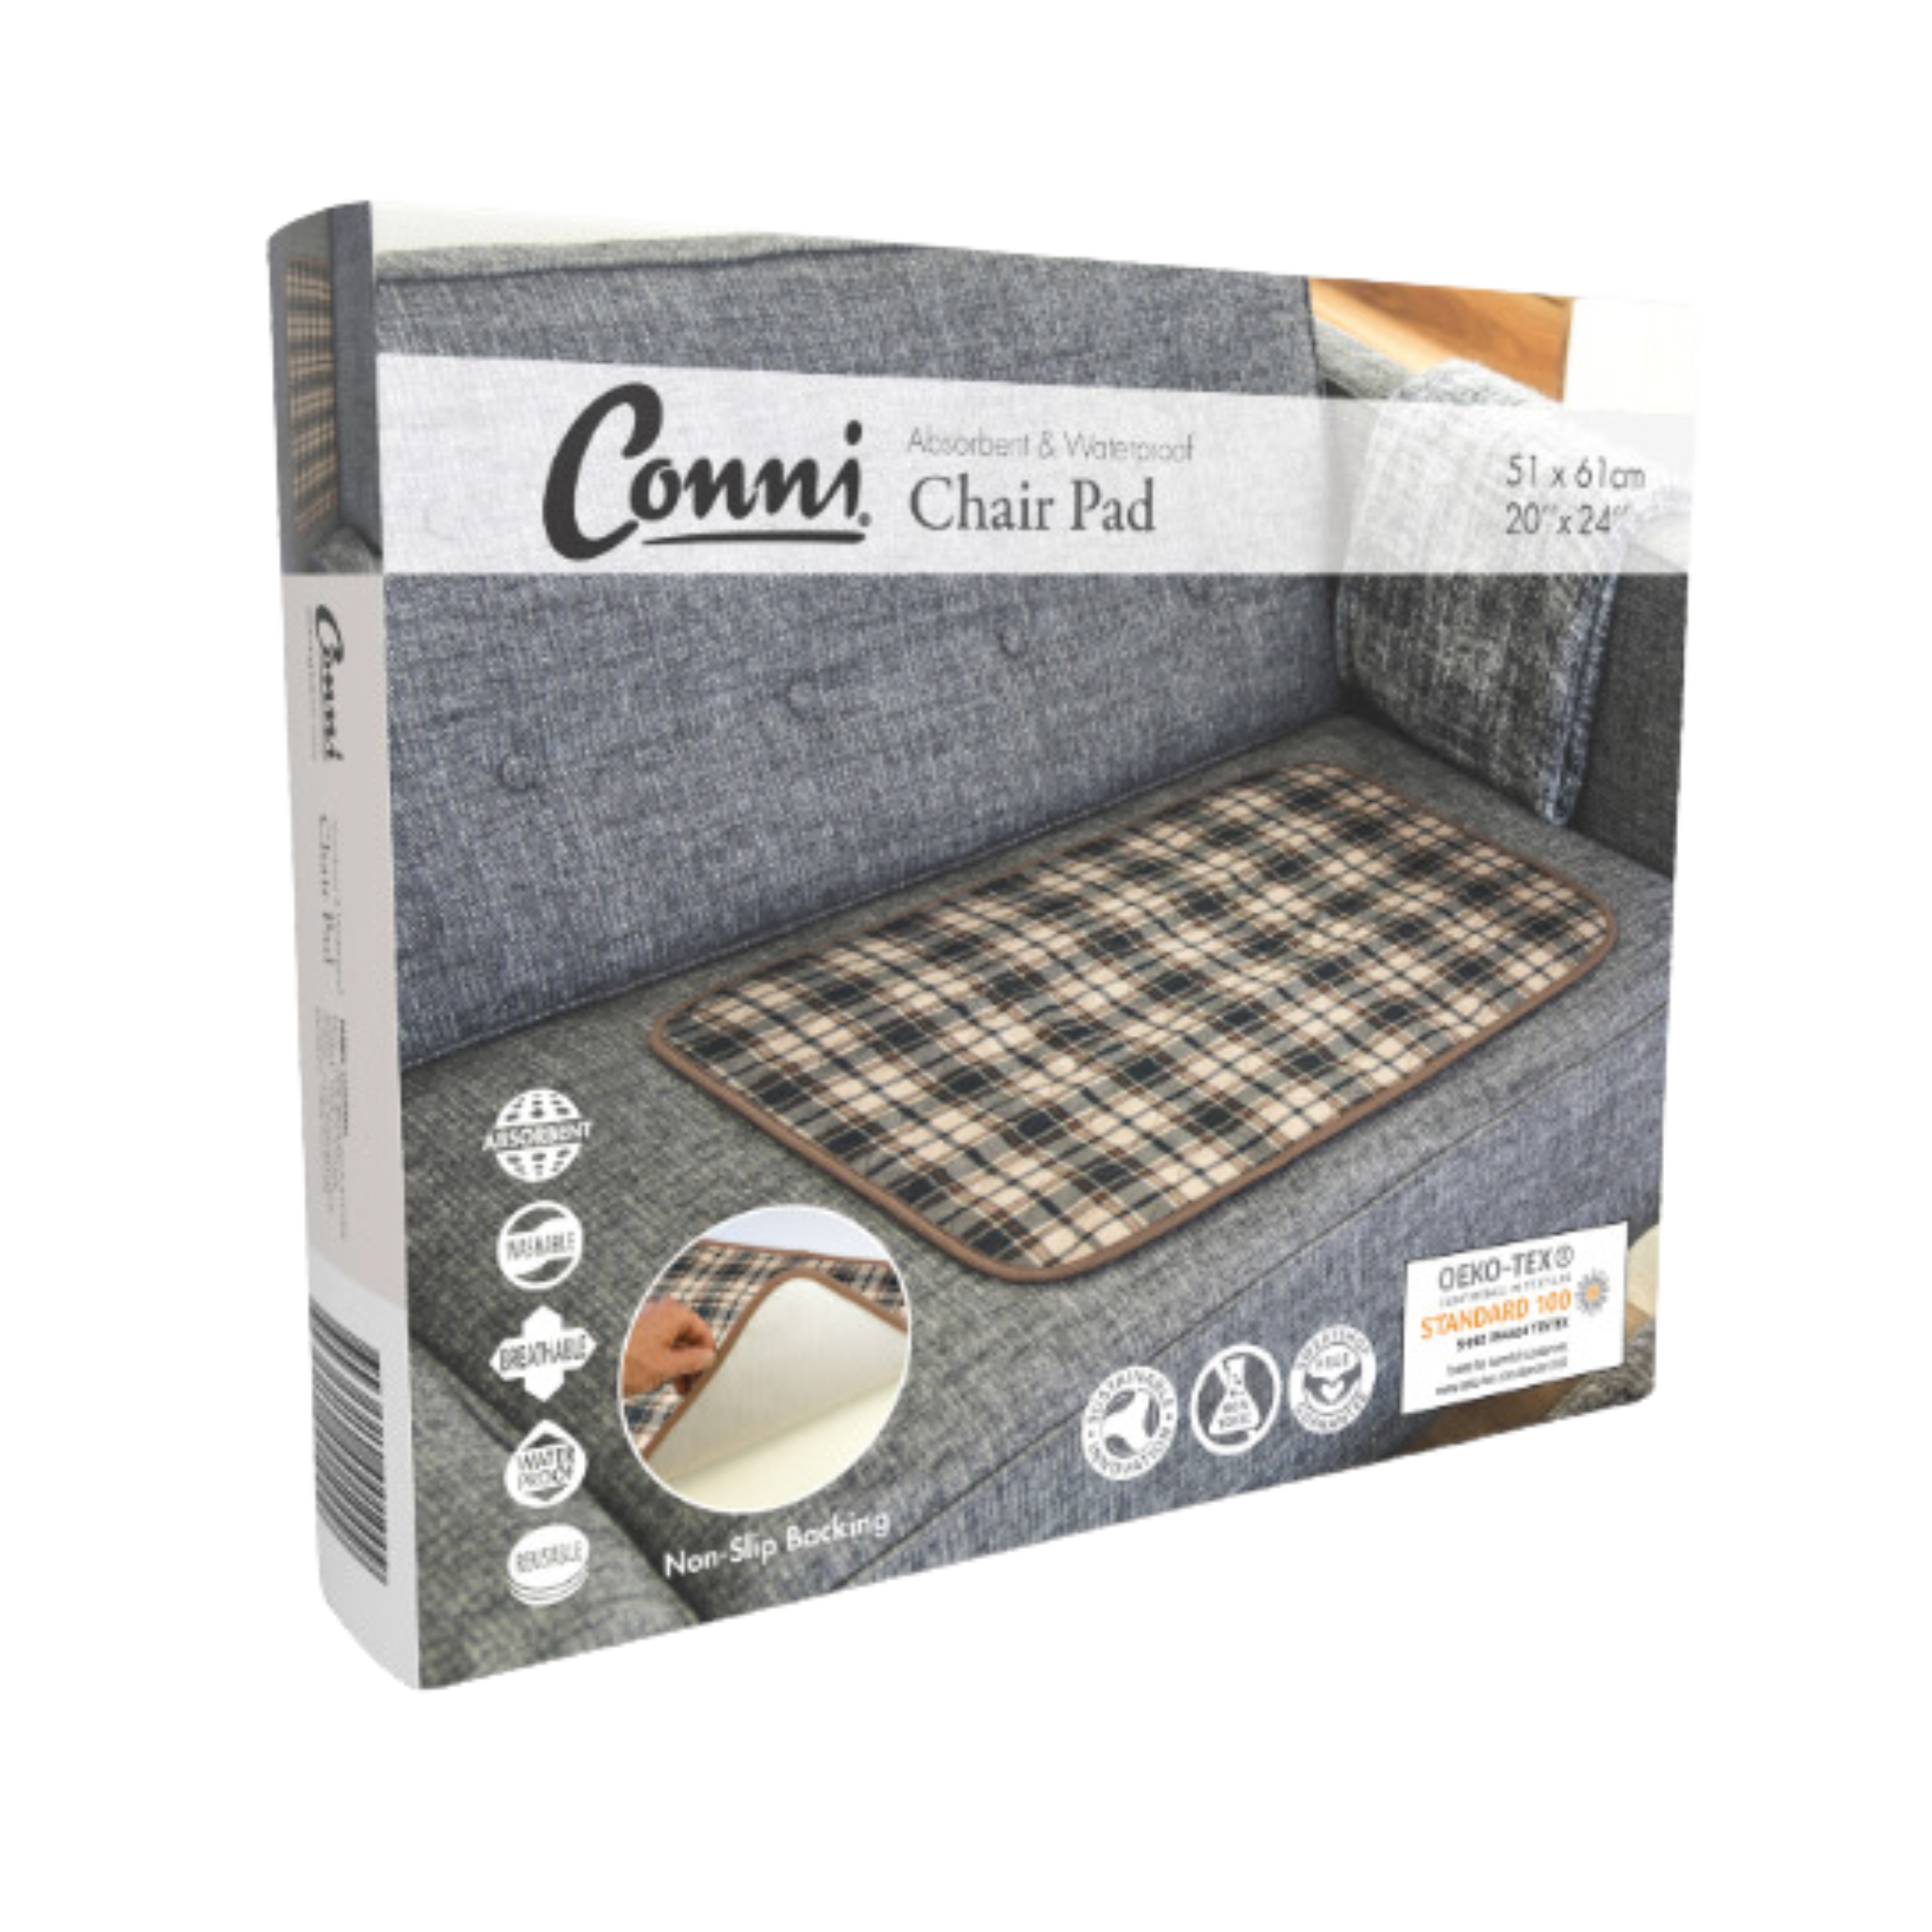 Conni Chairpad Large - Plaid